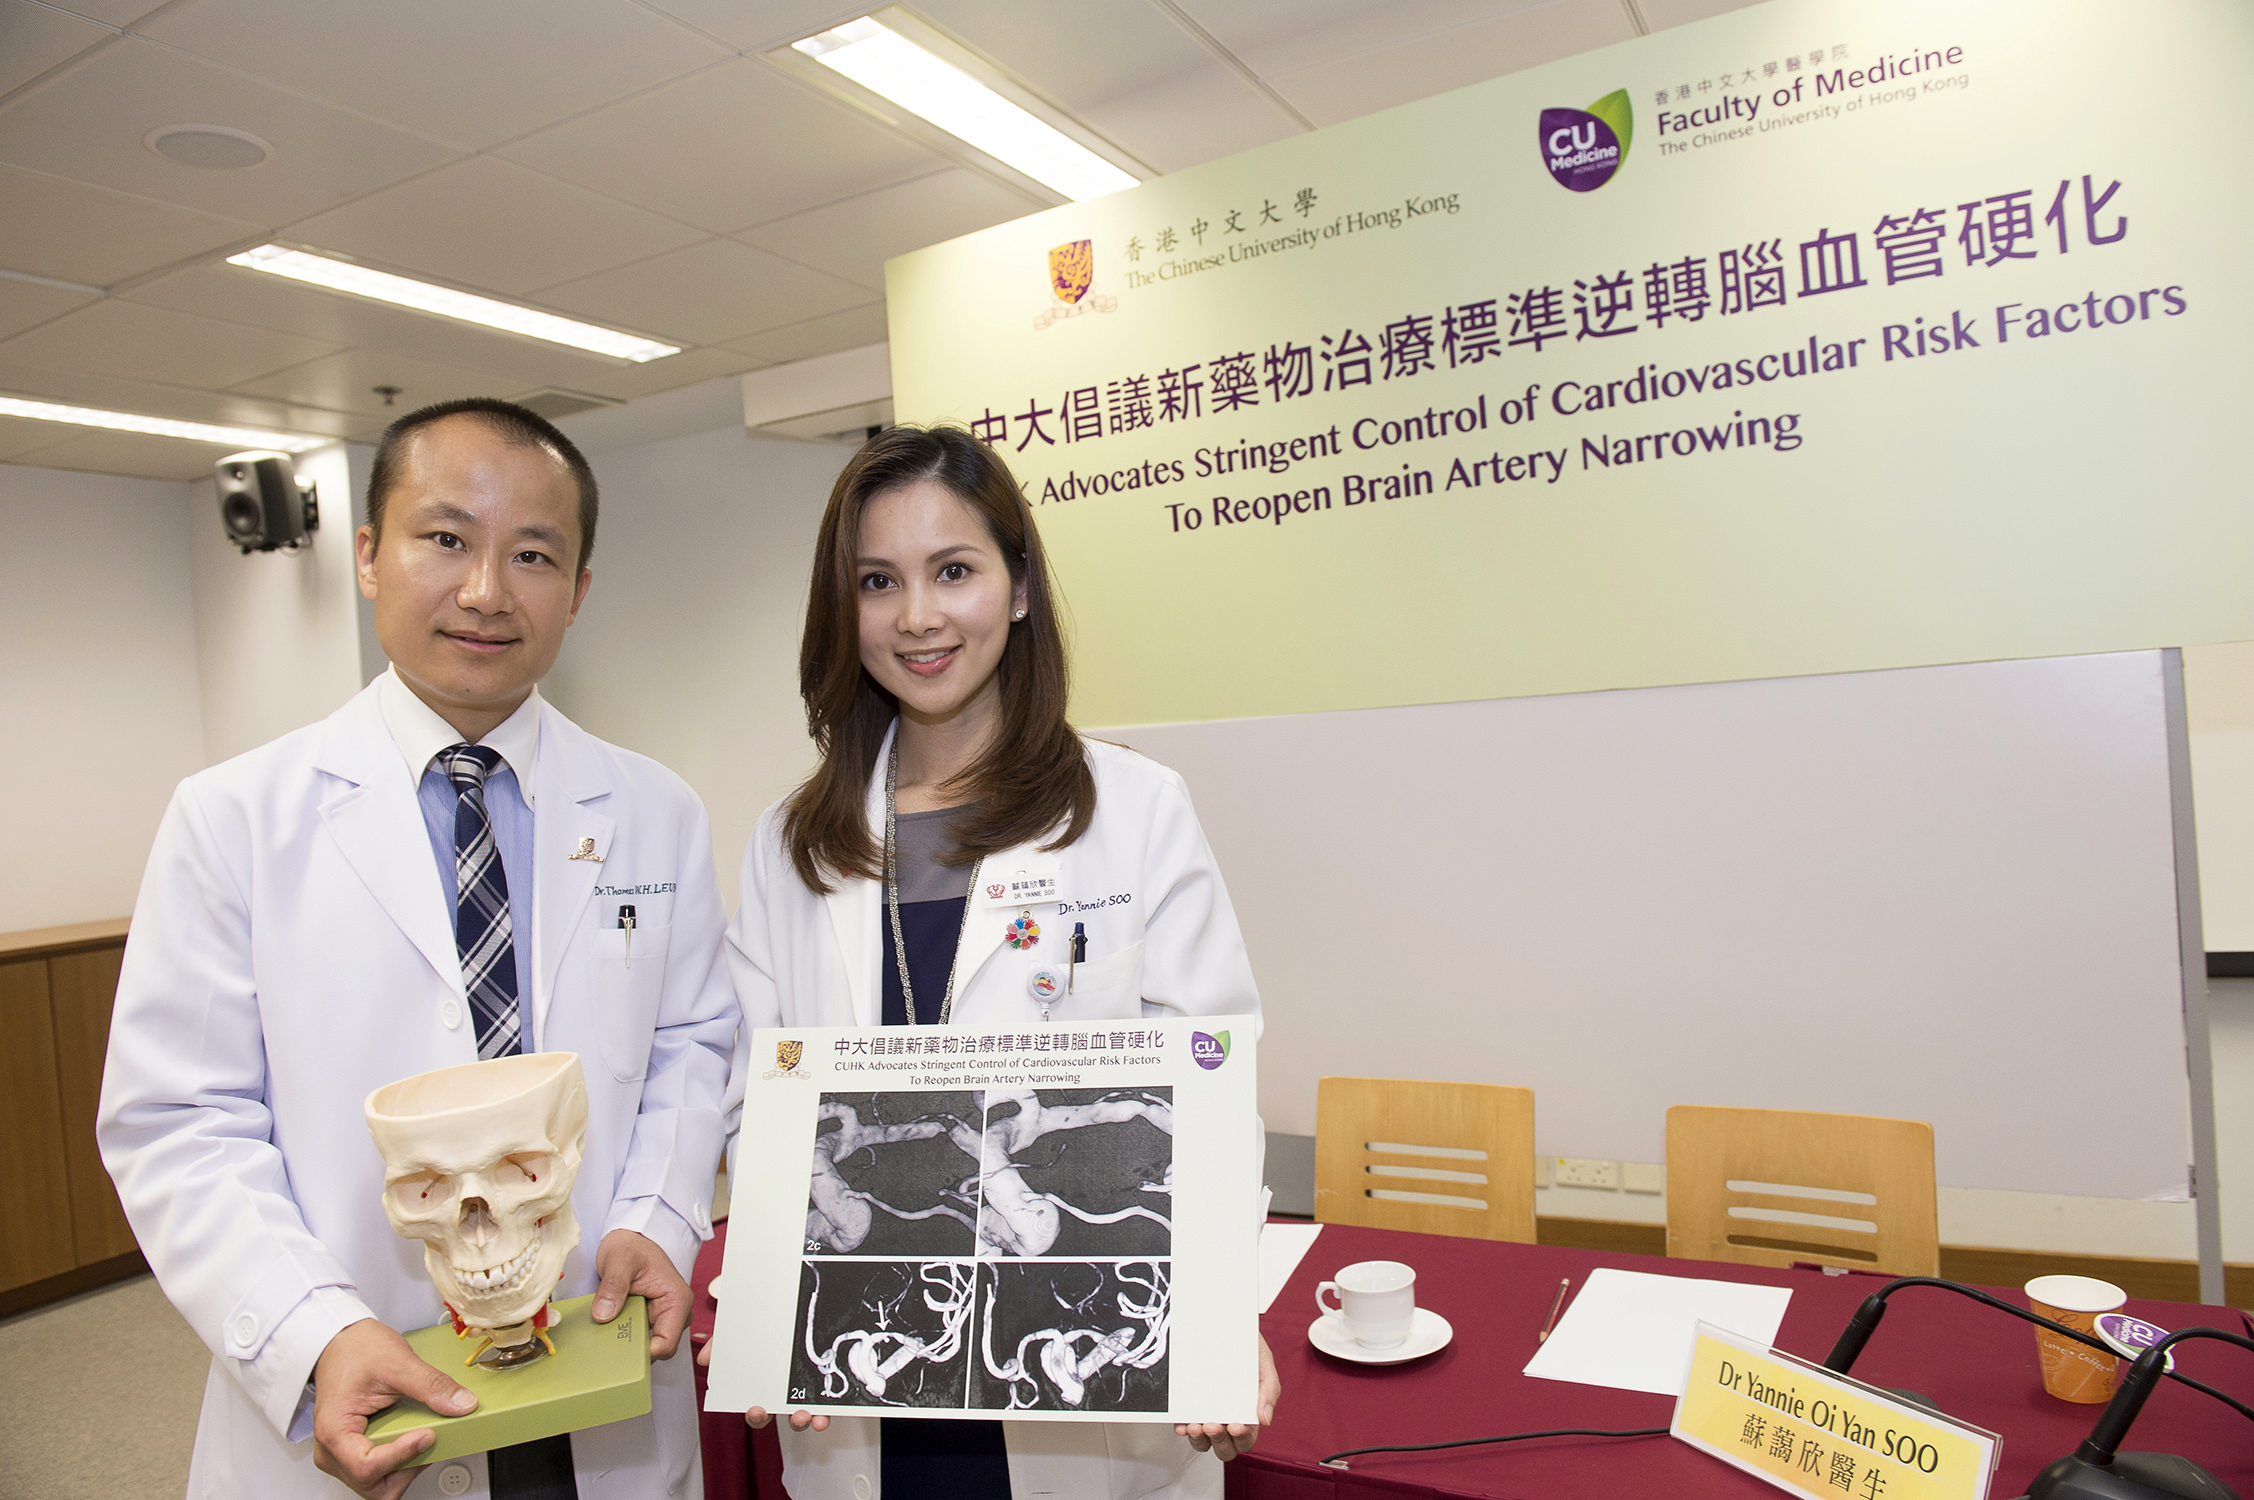 (From left) Dr. Thomas Wai Hong LEUNG, Lee Quo Wei Associate Professor of Neurology, and Dr. Yannie Oi Yan SOO, Clinical Assistant Professor (honorary), from the Department of Medicine and Therapeutics at CUHK advocates a stringent control of cardiovascular risk factor to reopen narrowed brain arteries. By the end of the first year of the study, the high-grade arterial stenosis either remained quiescent or remarkably regressed in over 90% of the participants. 